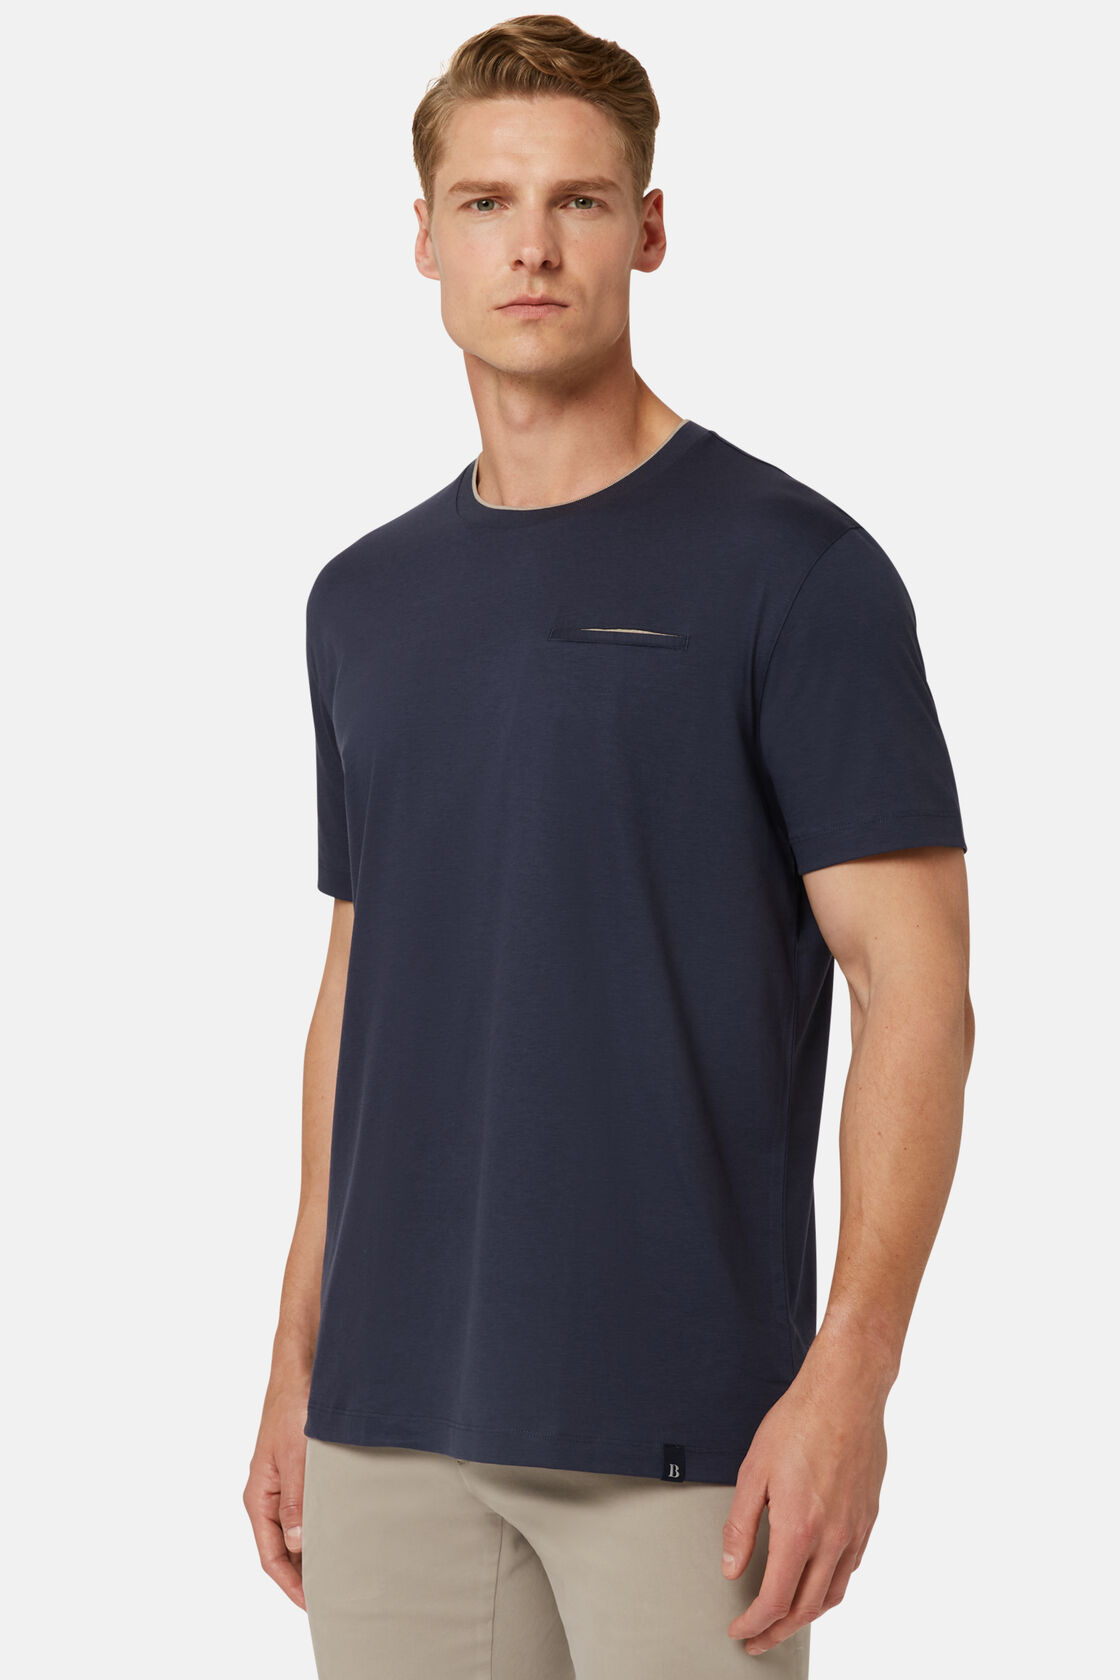 T-Shirt in Cotton and Tencel Jersey, Navy blue, hi-res